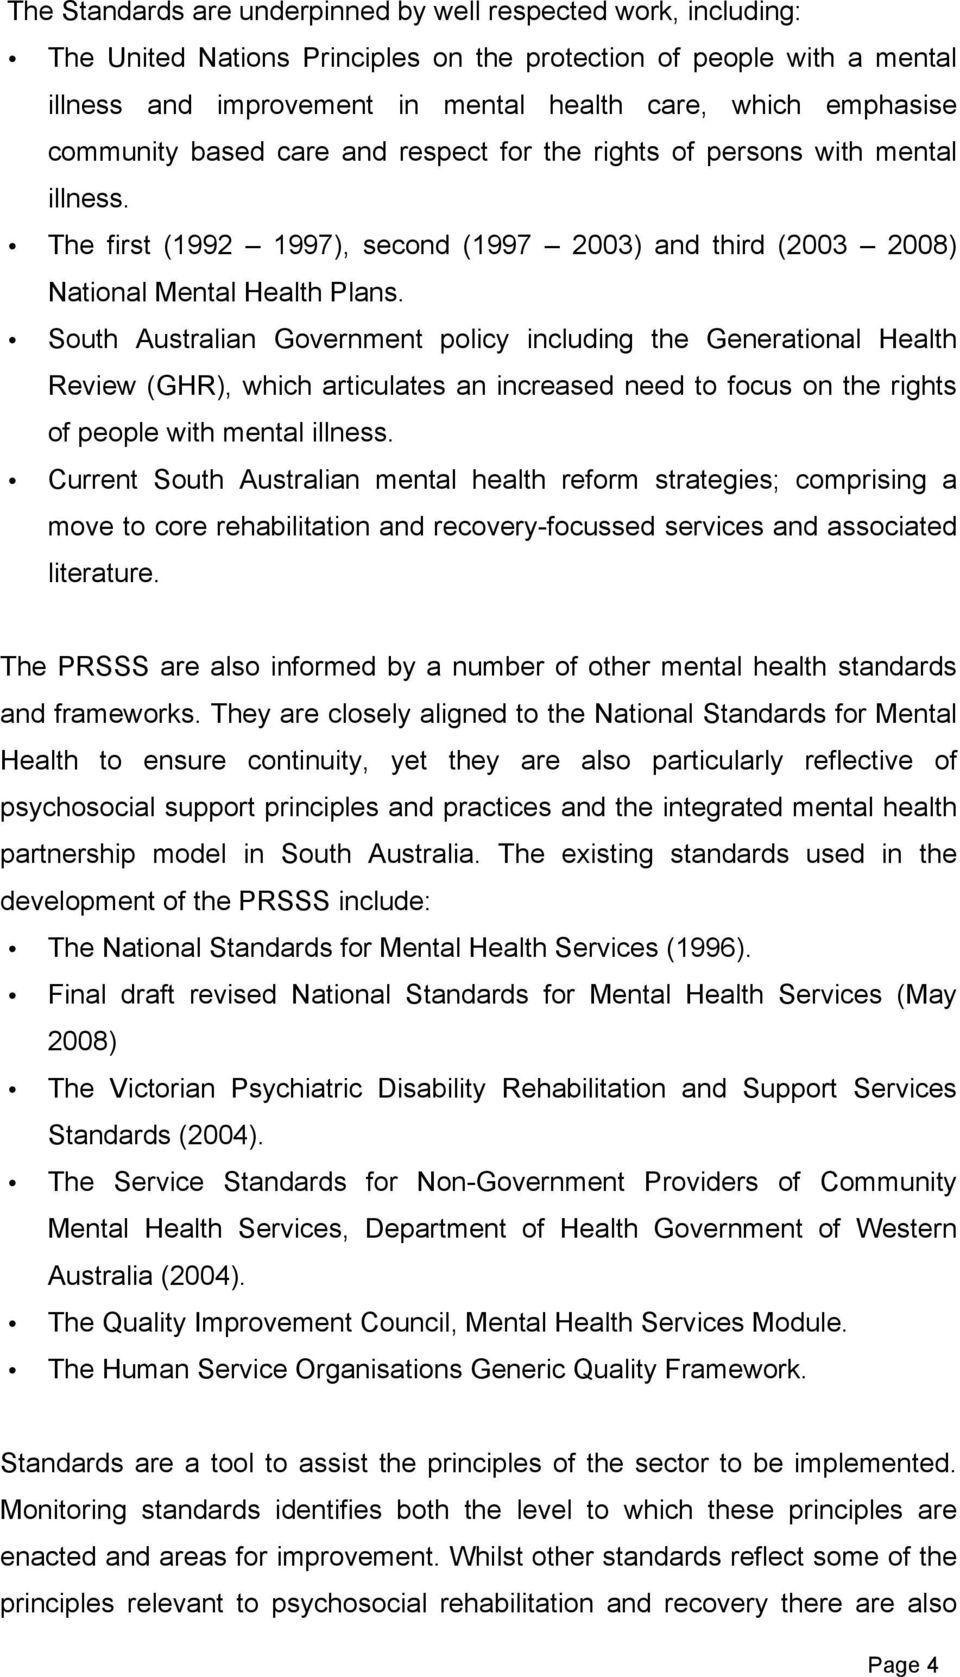 South Australian Government policy including the Generational Health Review (GHR), which articulates an increased need to focus on the rights of people with mental illness.